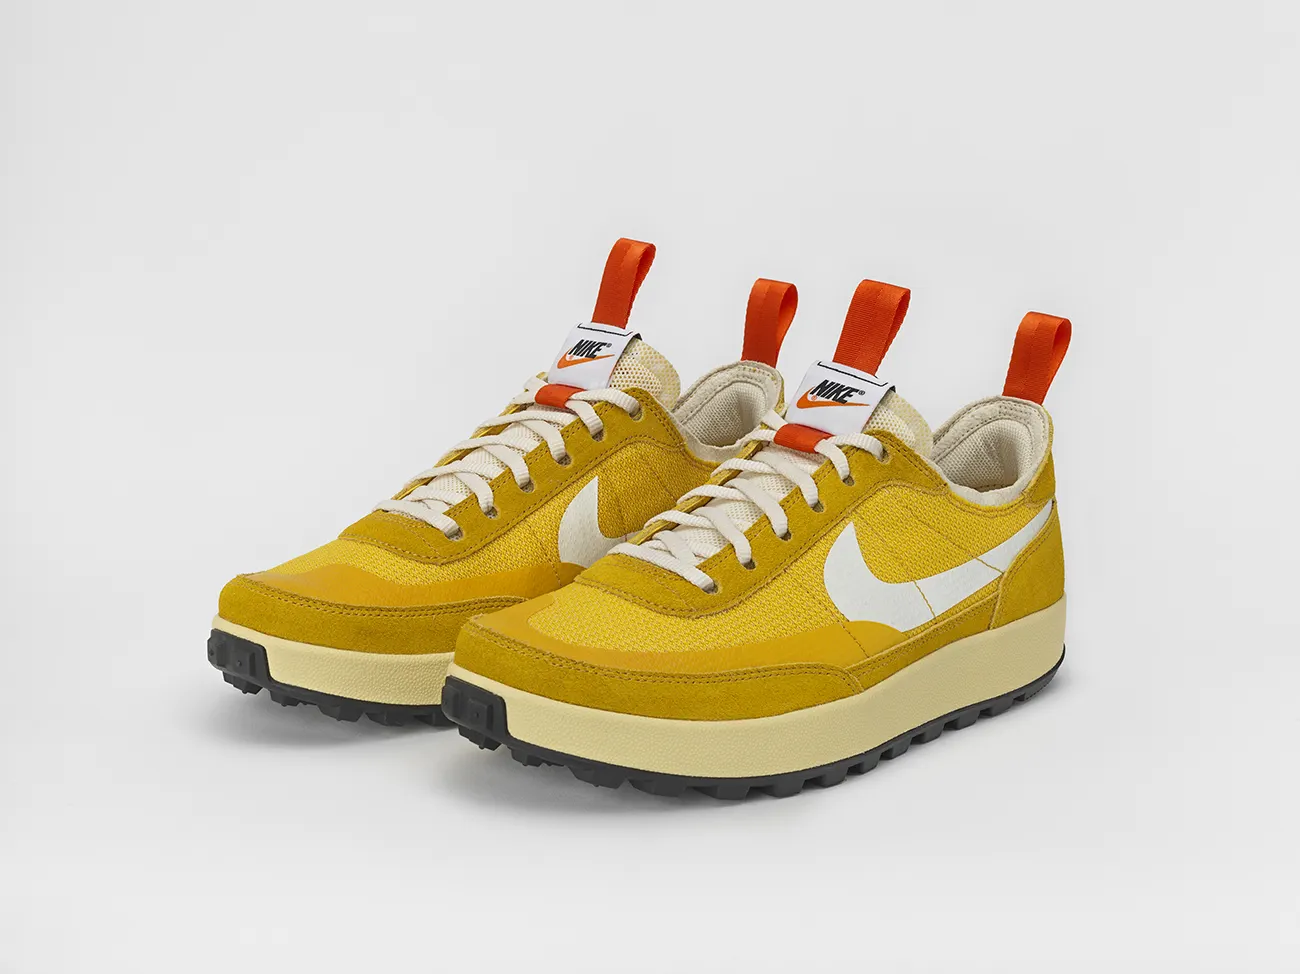 Tom Sachs & Nike announce a new colorway of the NikeCraft General 